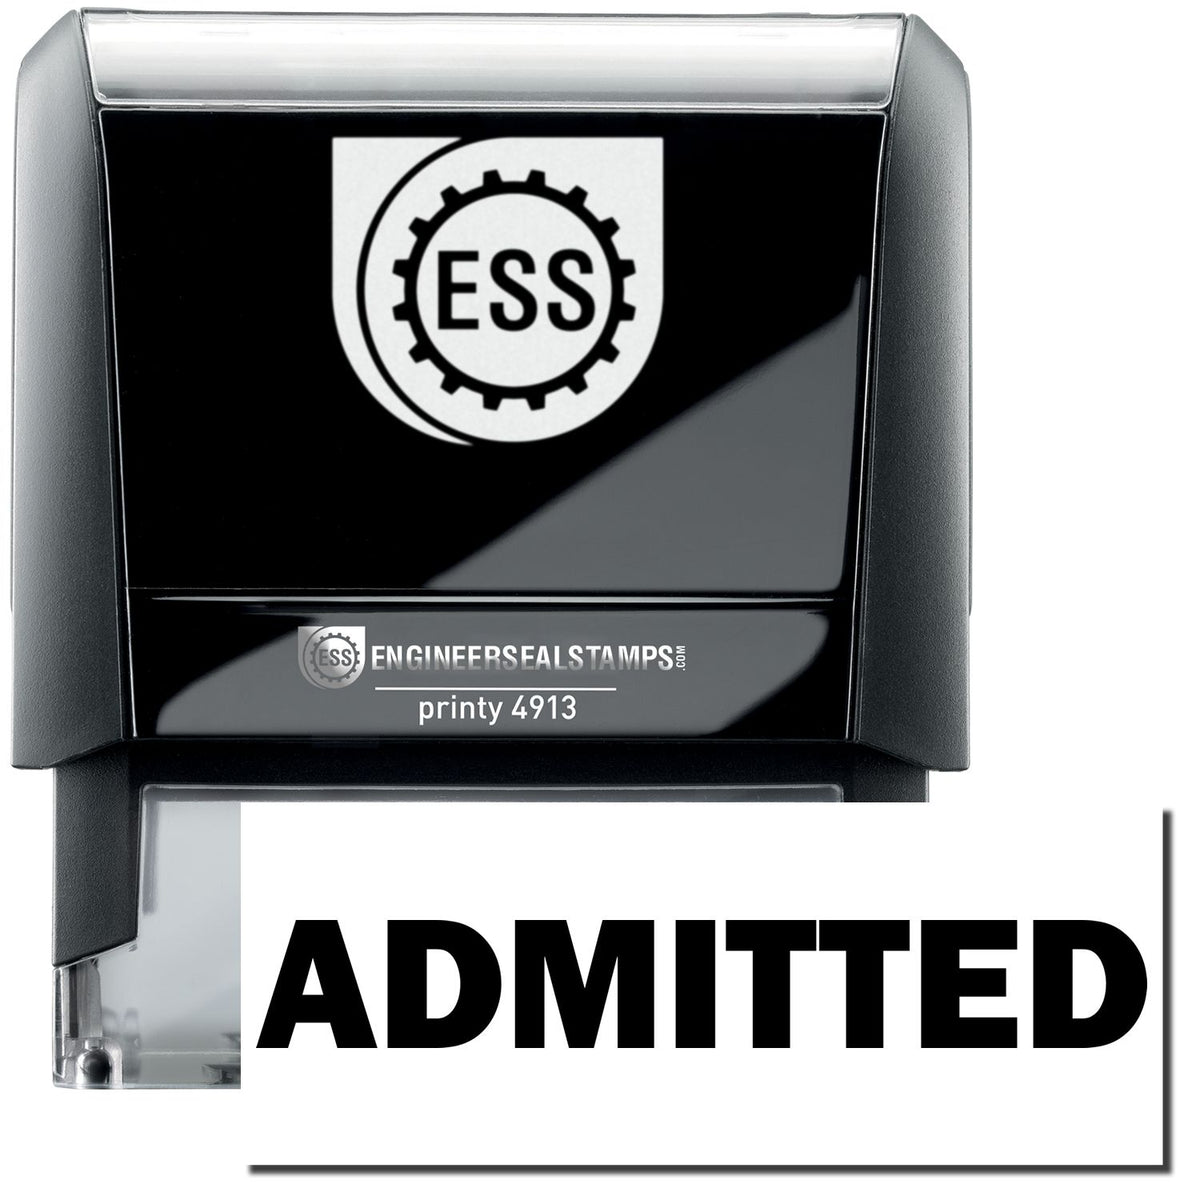 A self-inking stamp with a stamped image showing how the text &quot;ADMITTED&quot; in a large font is displayed by it after stamping.